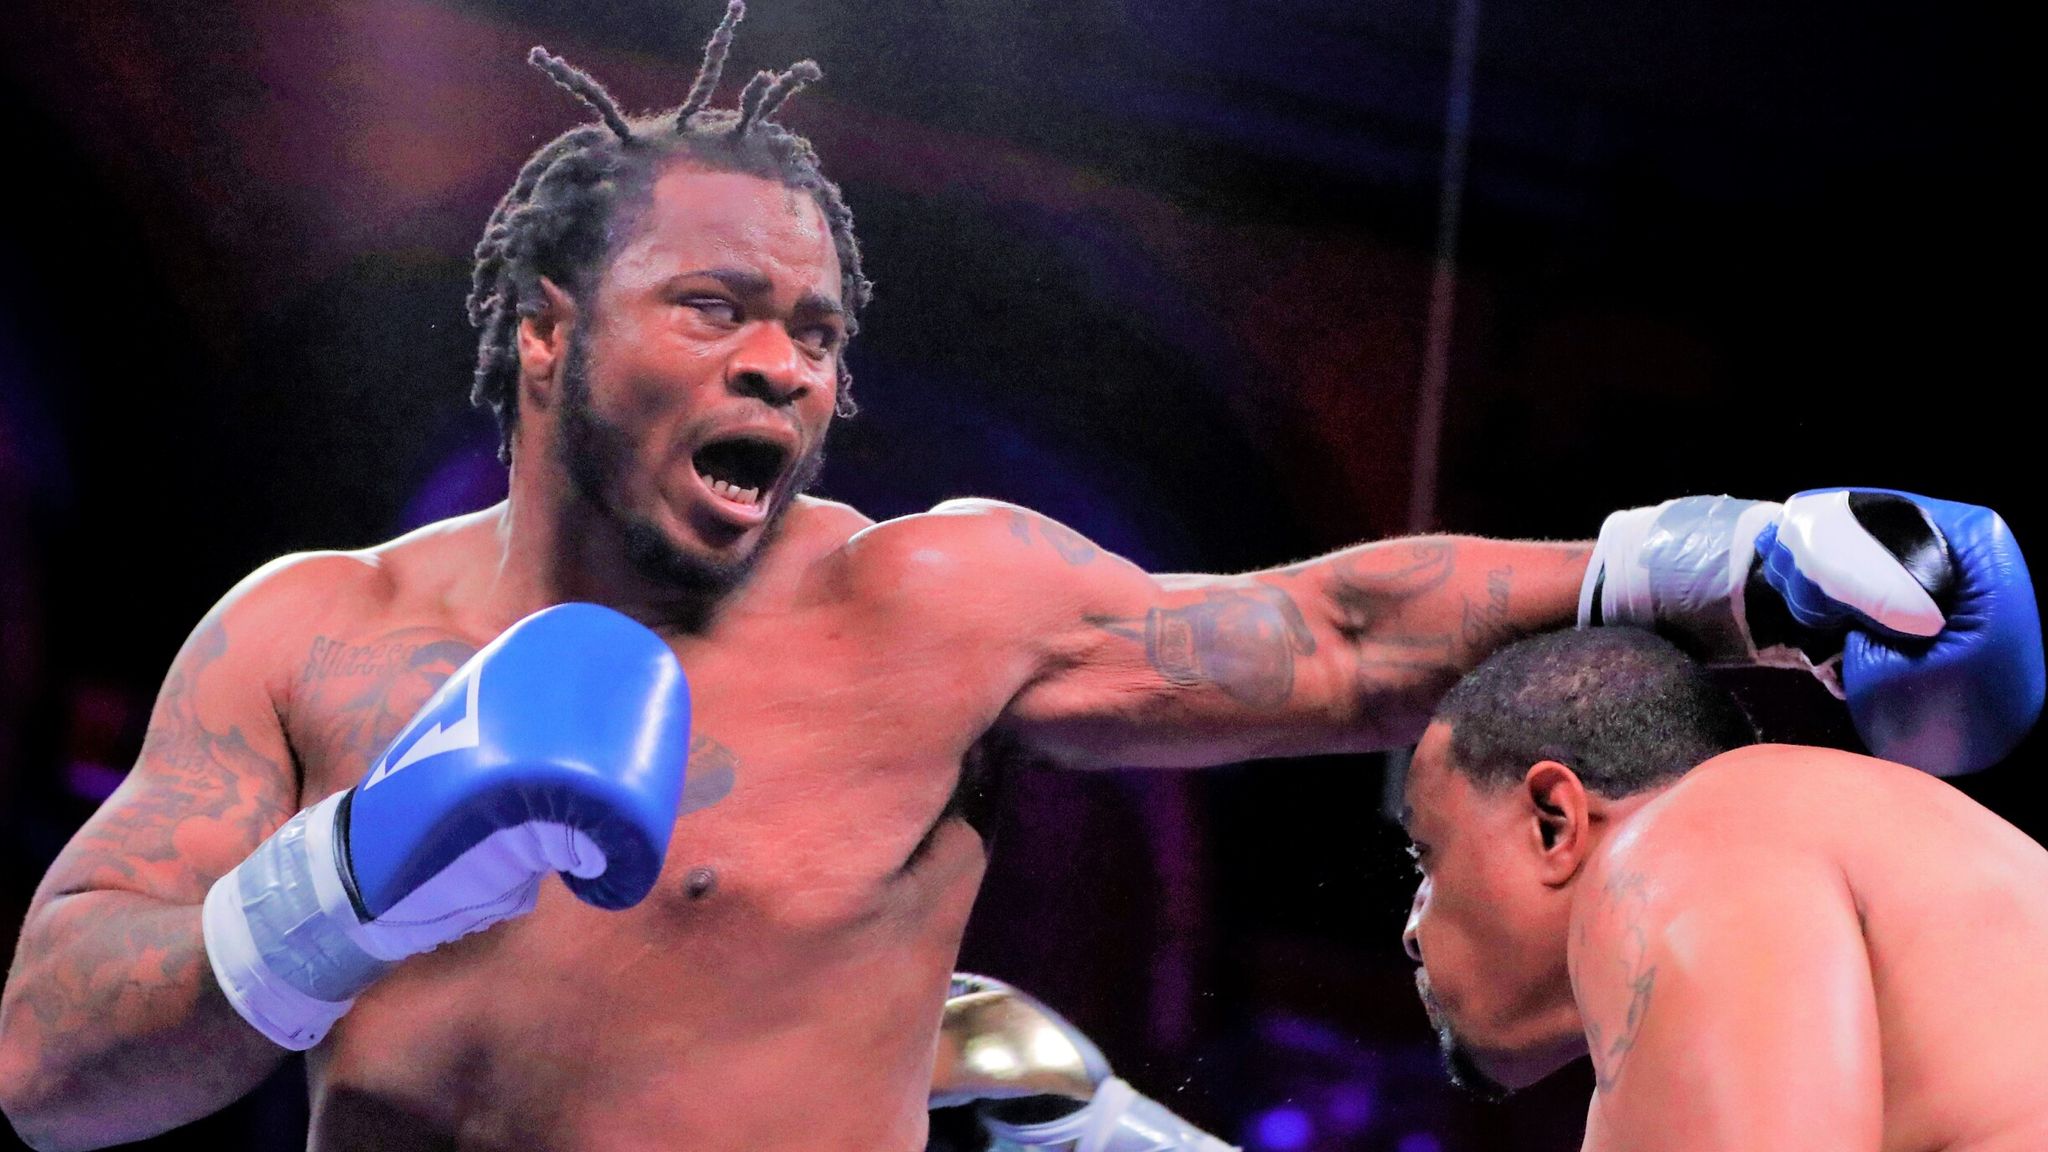 Jermaine Franklin Americas heavyweight hope returns to the ring